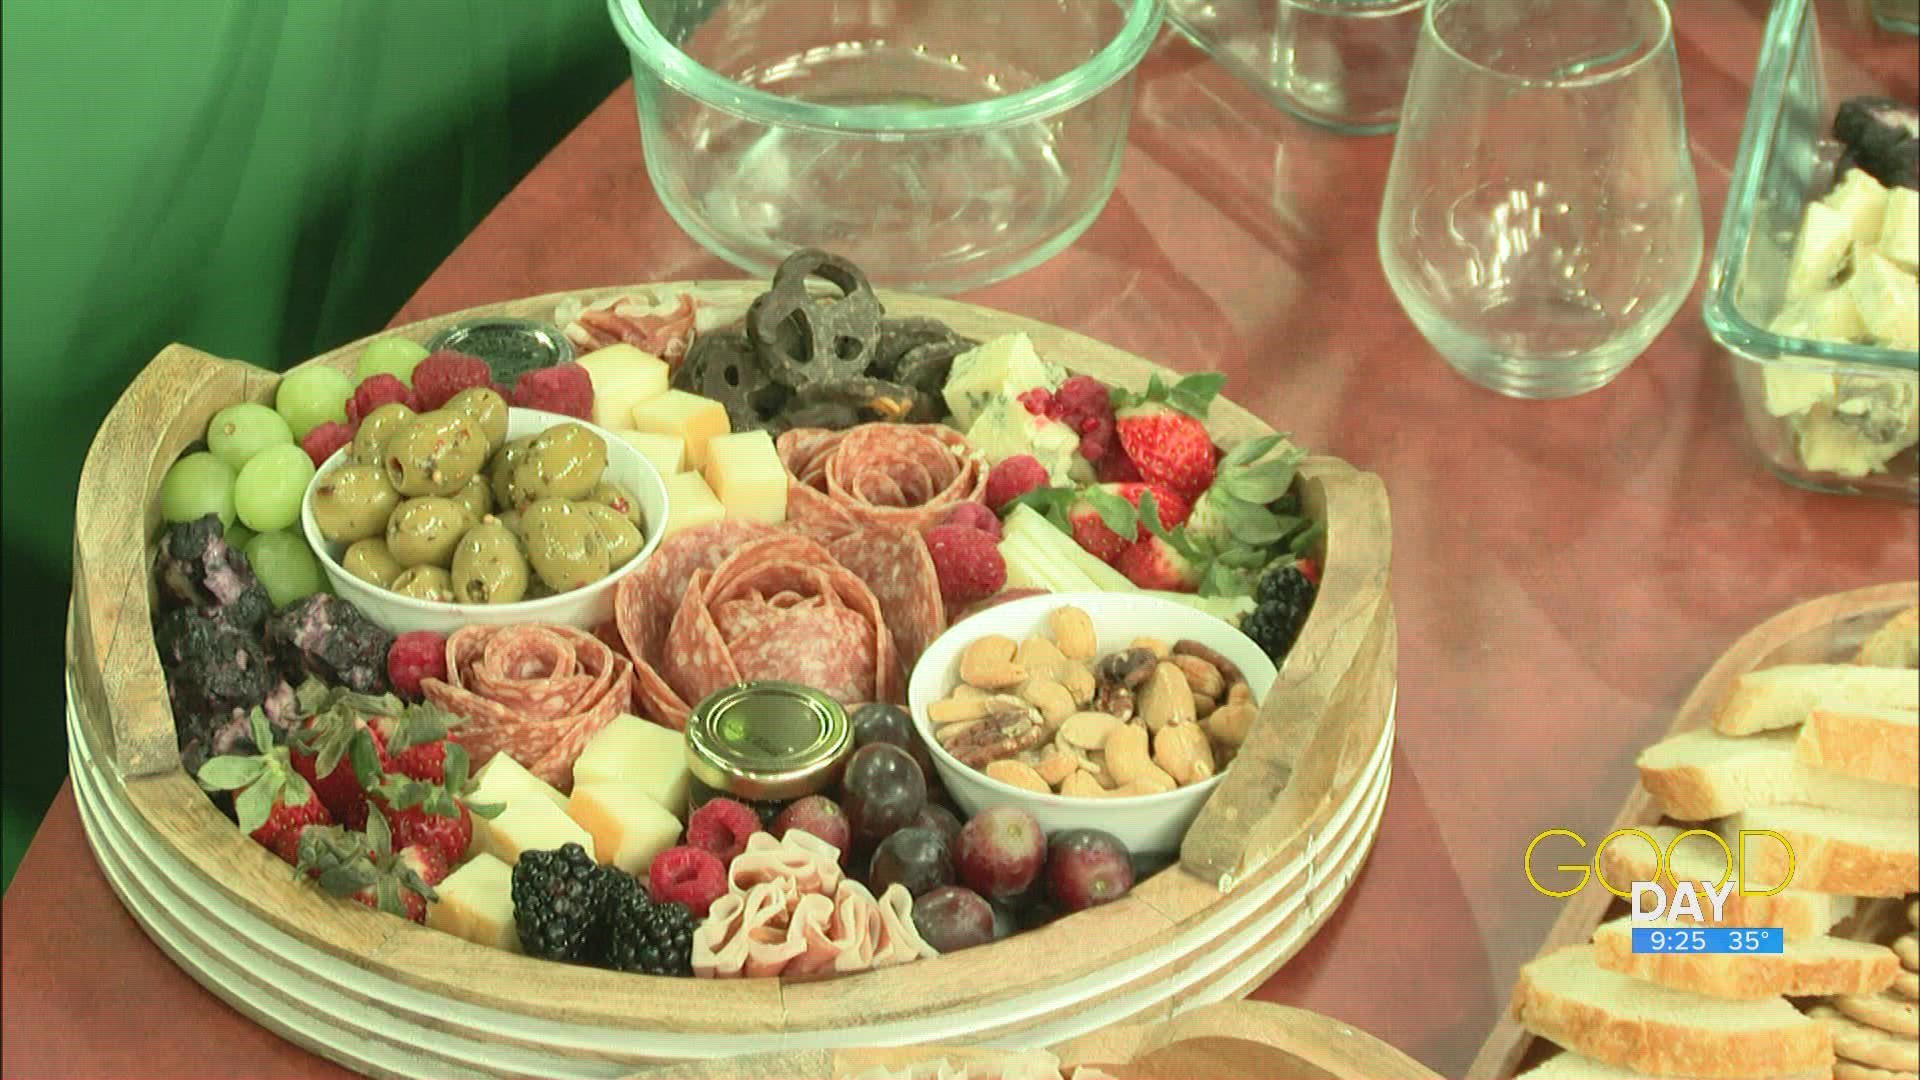 Ashley Norris of Glass City Charcuterie shows the Good Day crew how to make a beautiful charcuterie board.